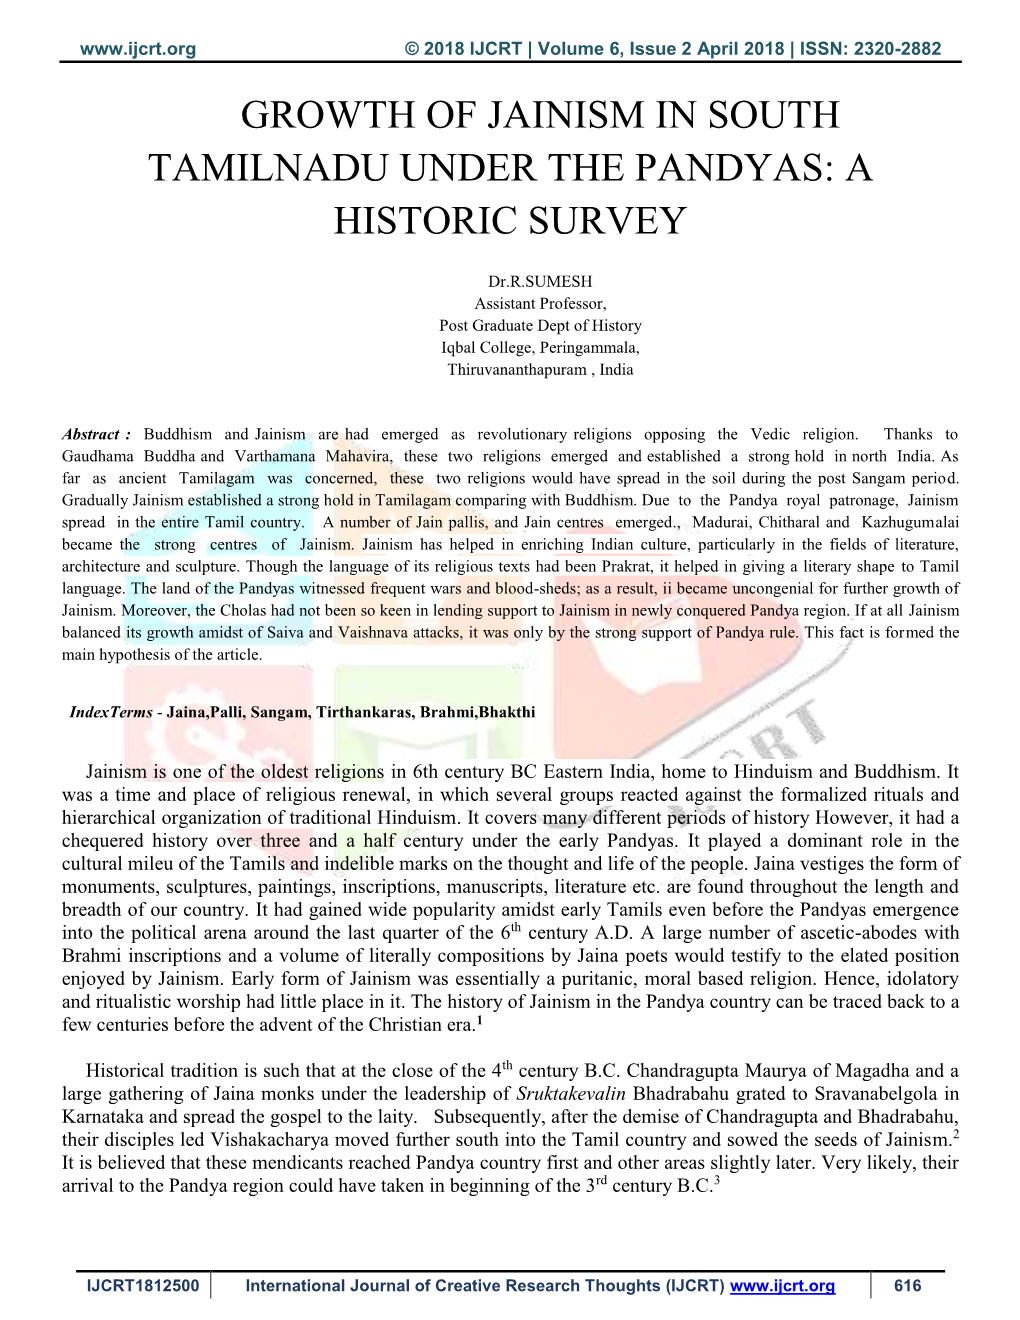 Growth of Jainism in South Tamilnadu Under the Pandyas: a Historic Survey